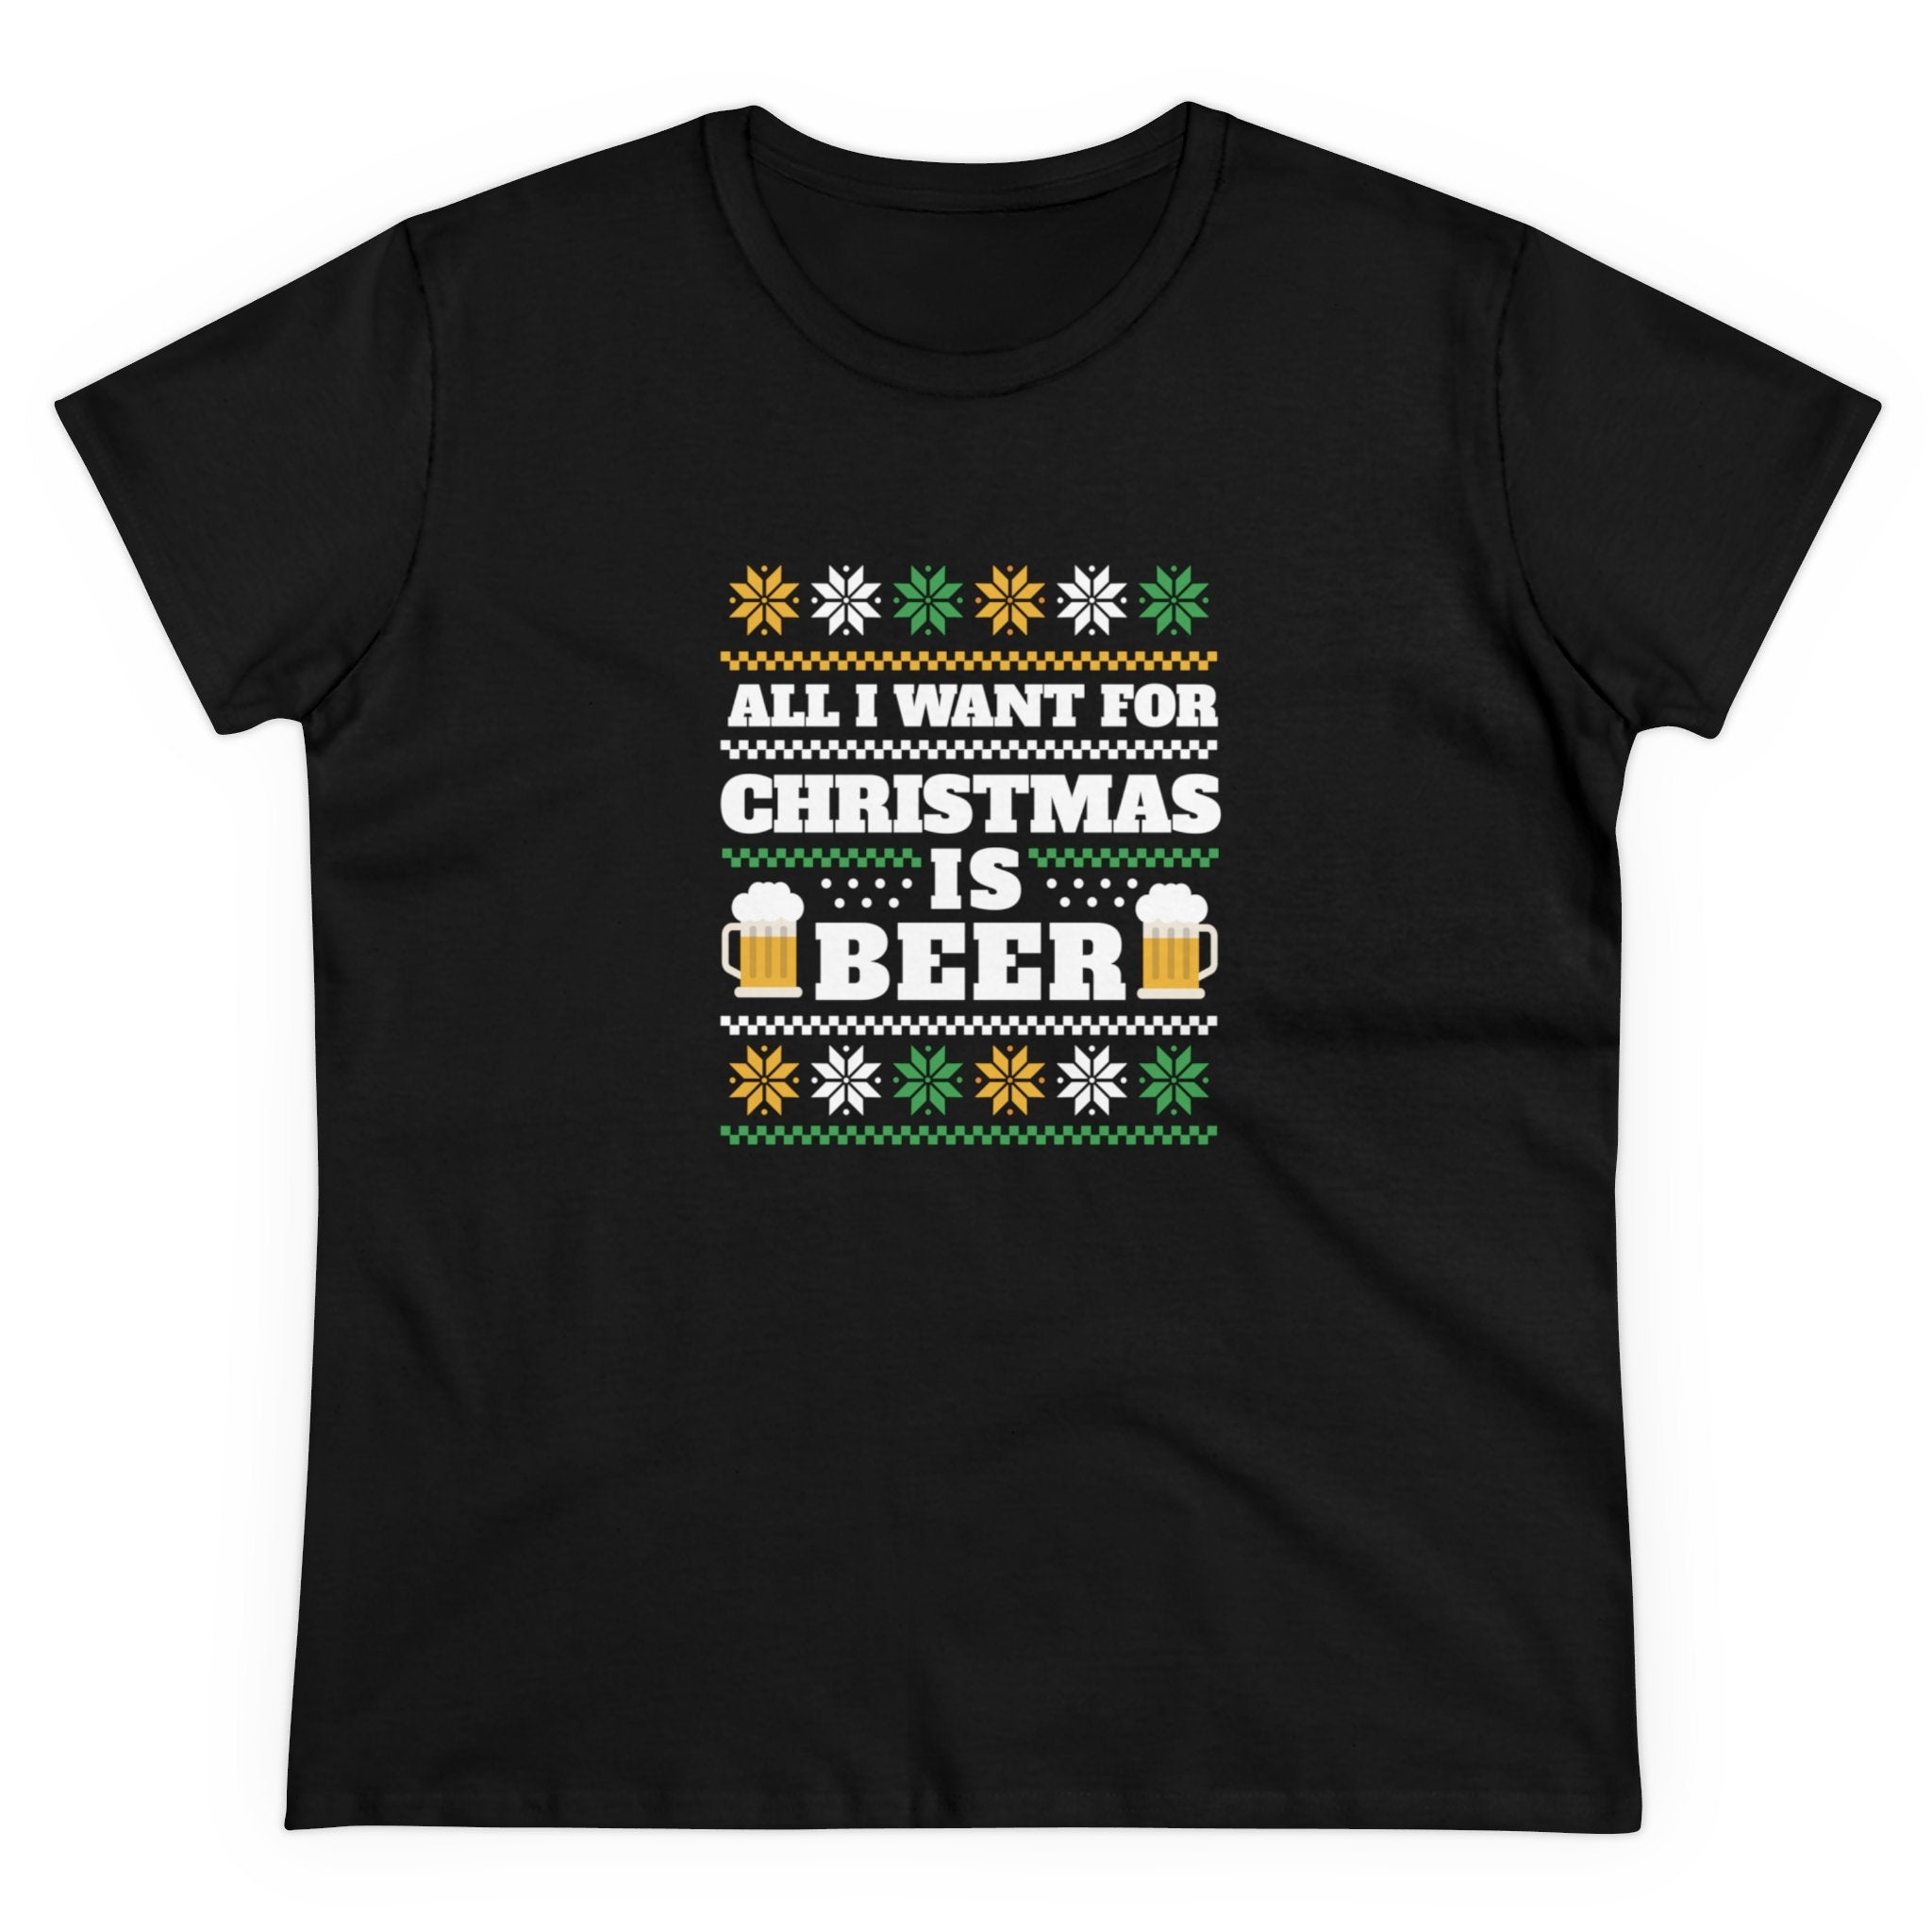 A black Beer Ugly Sweater - Women's Tee with the text "All I Want for Christmas is Beer" in white and yellow, adorned with beer mugs, stars, and festive patterns. Made from pre-shrunk cotton for ultimate comfort.